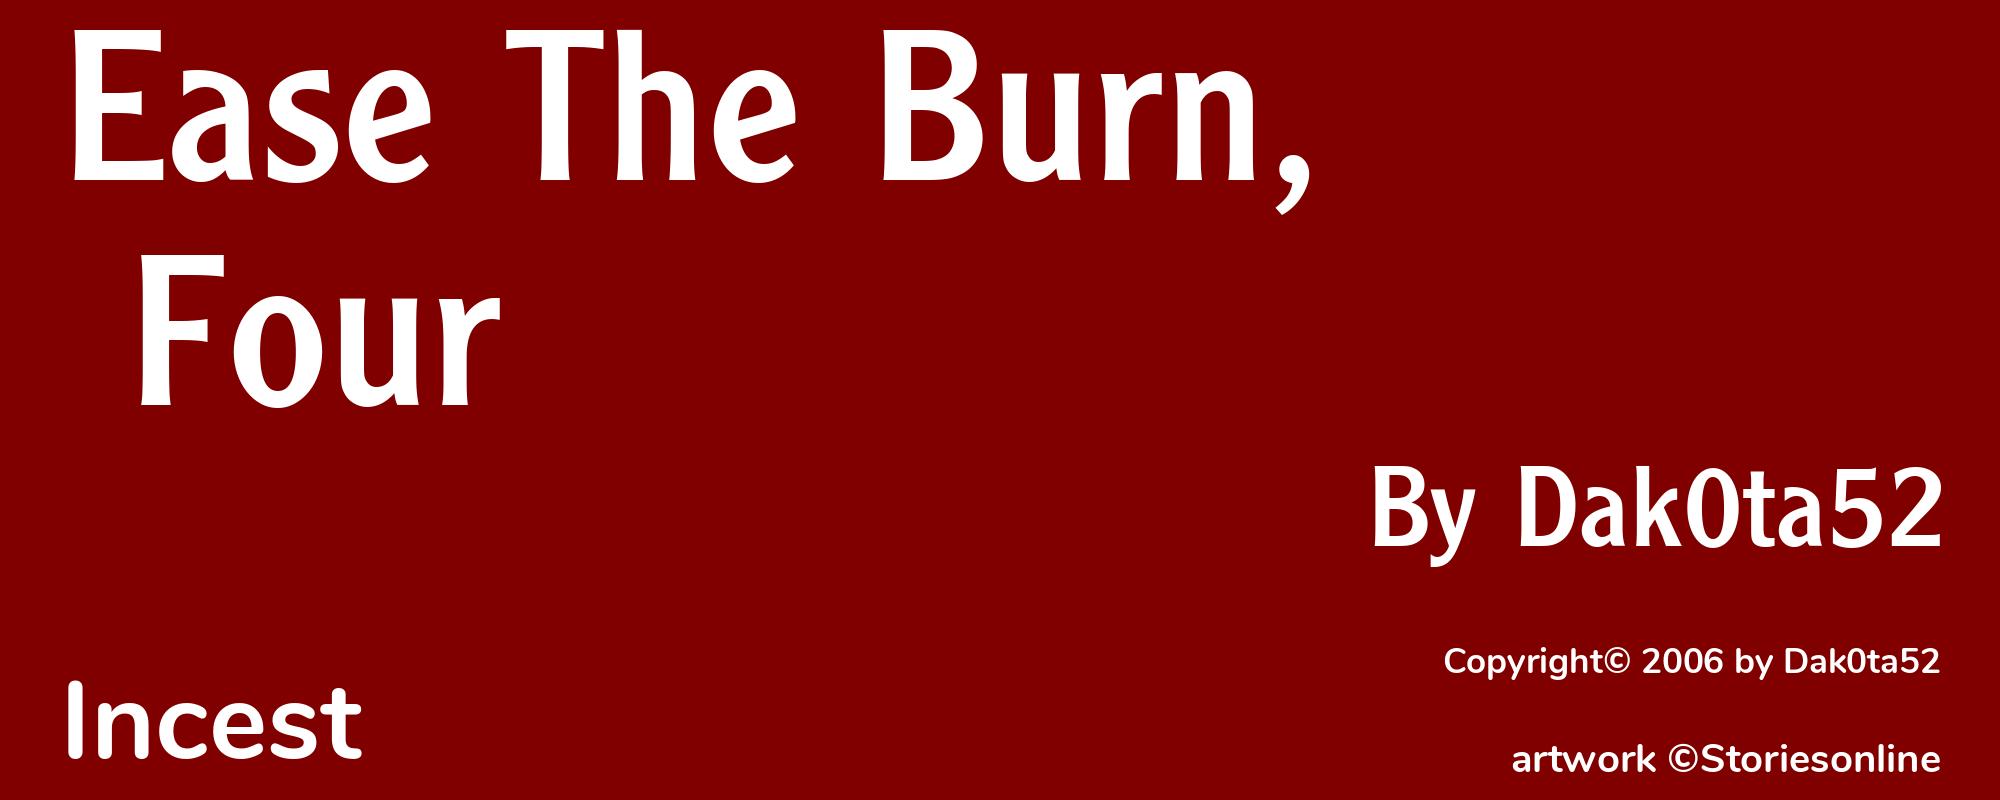 Ease The Burn, Four - Cover